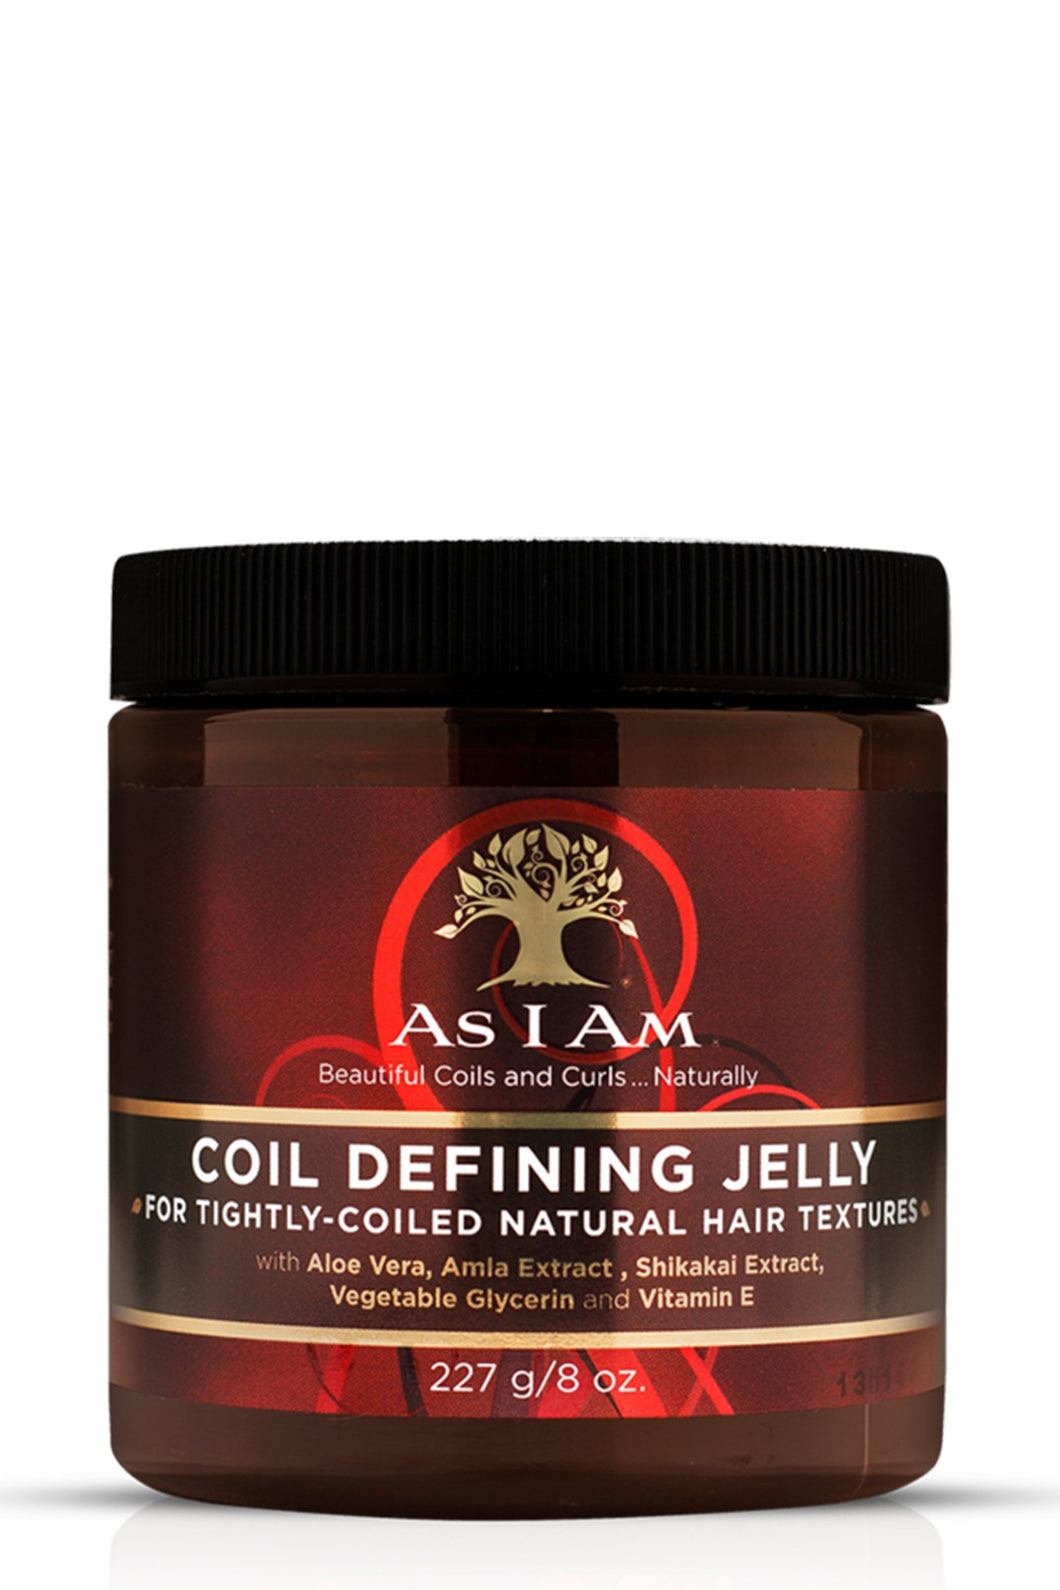 AS I AM Coil Defining Jelly Product